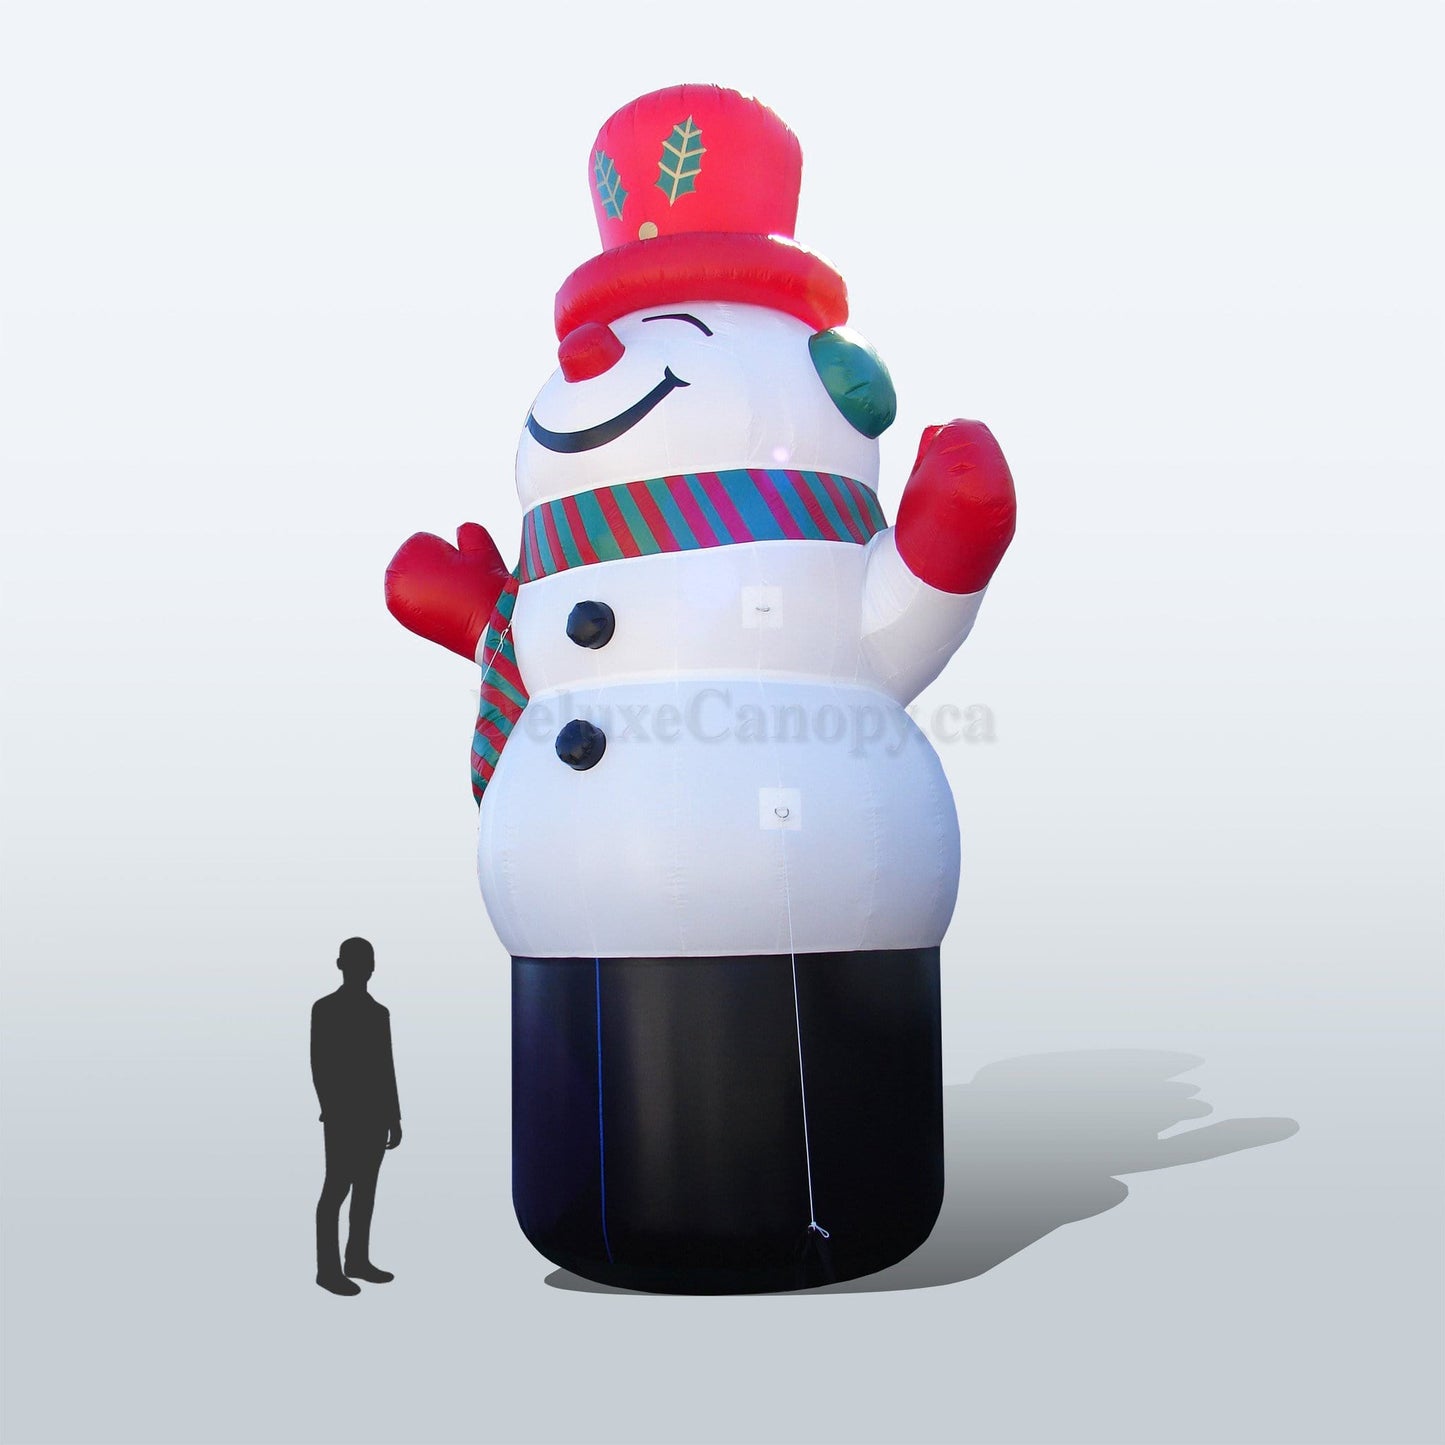 Inflatable Snowman - Deluxe Canopy